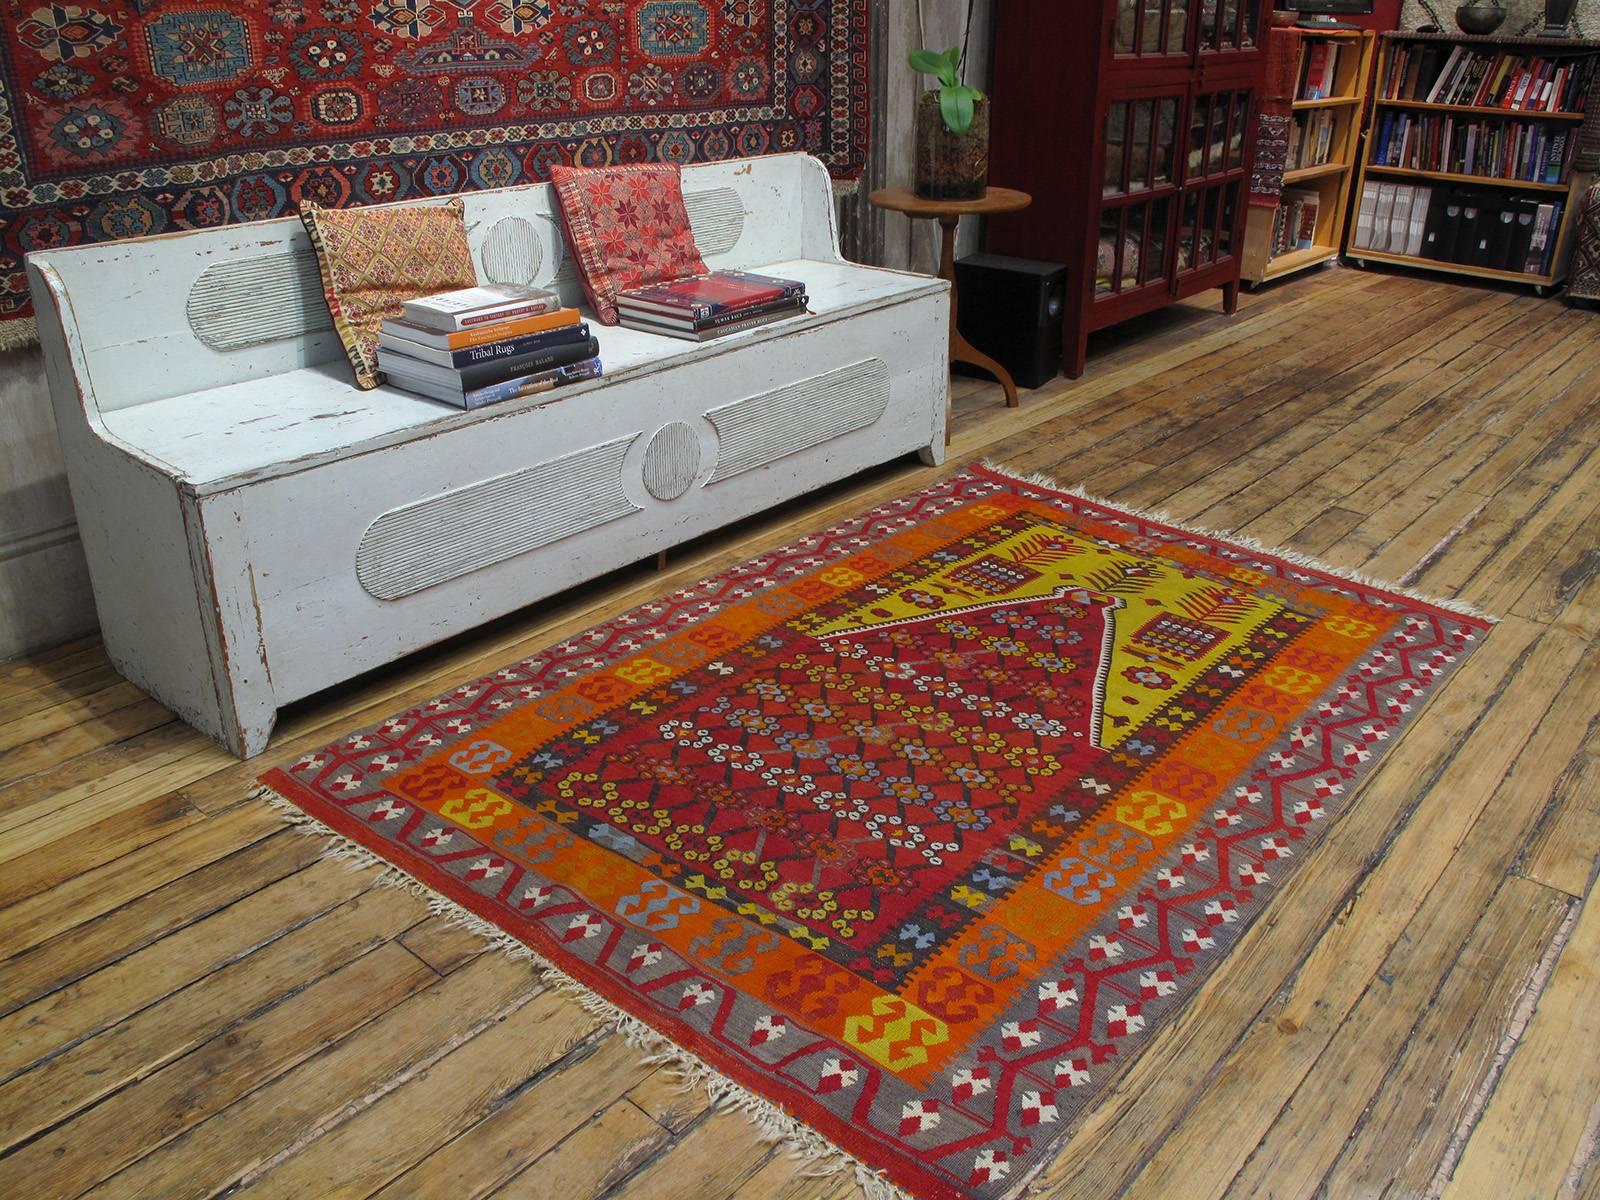 Central Anatolian Kilim rug. A beautiful old tribal Kilim rug from Central Turkey, featuring the popular 